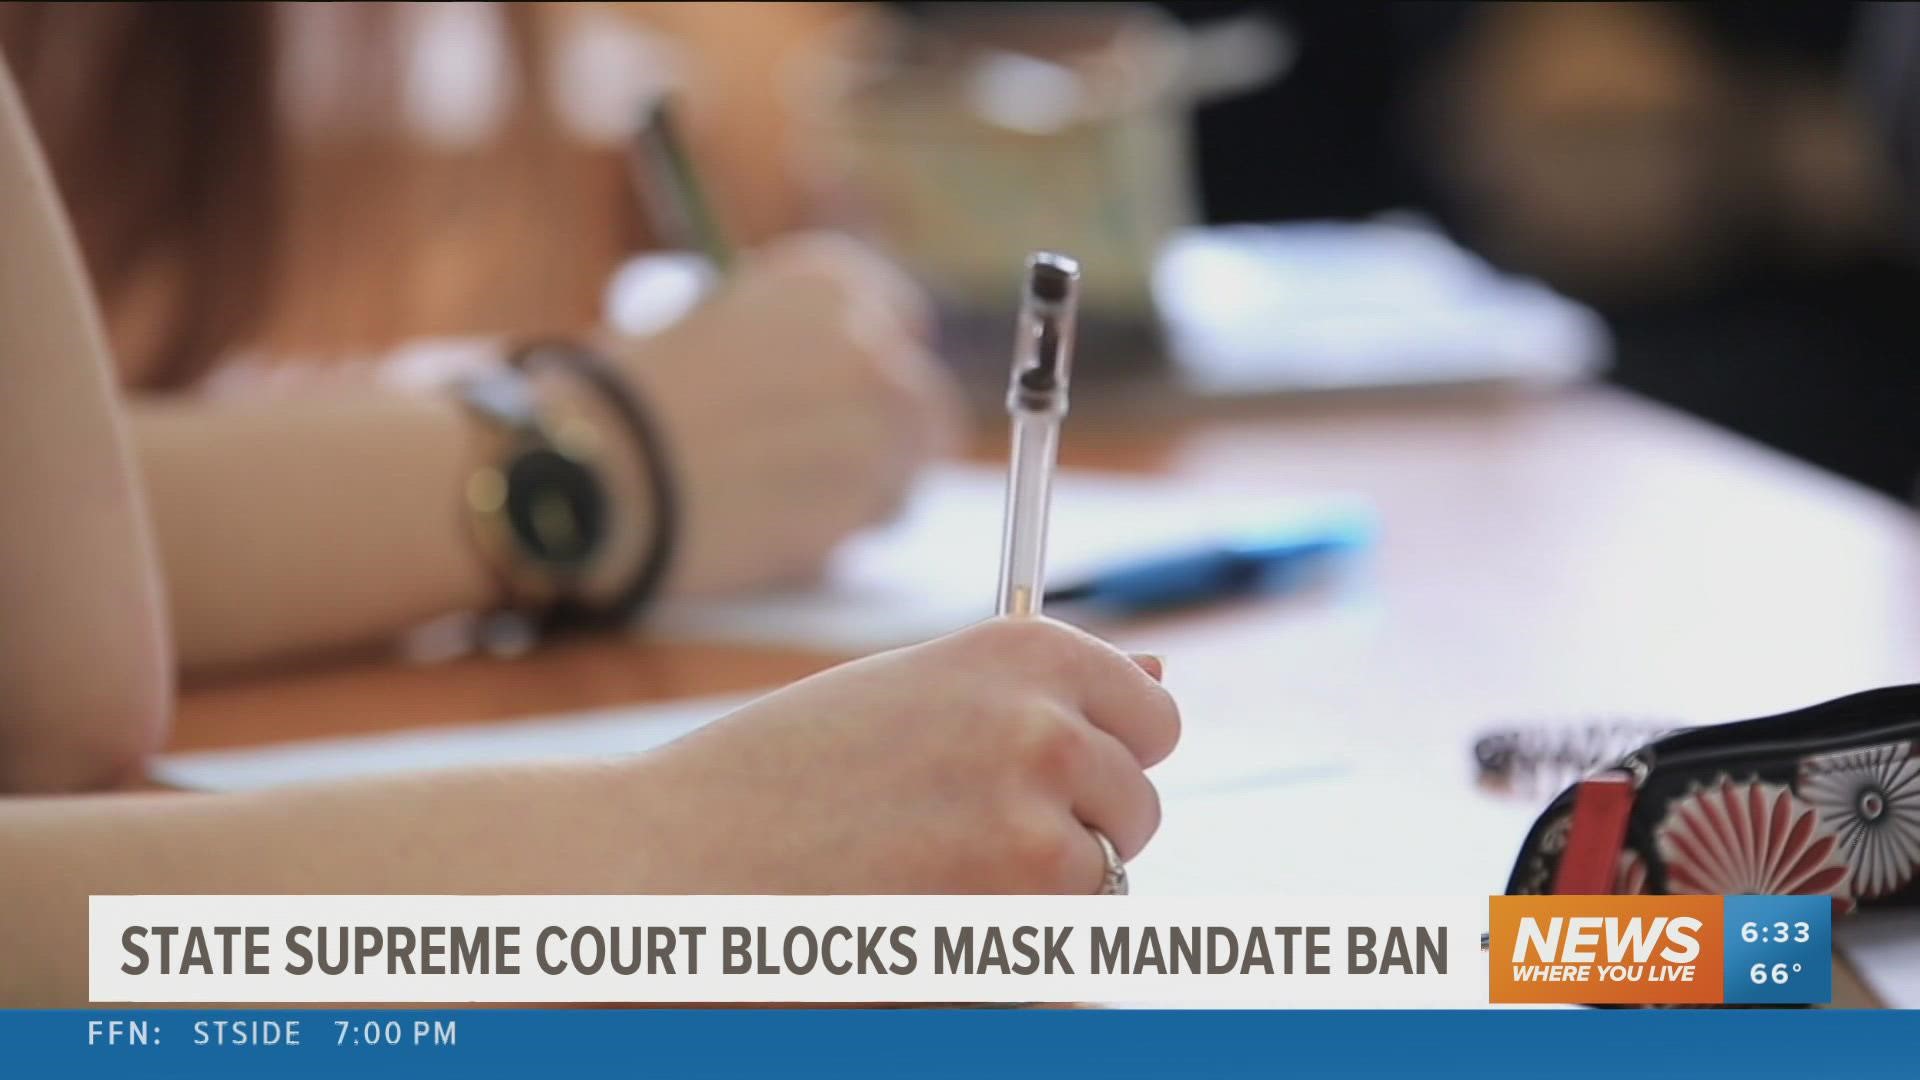 More than 100 school districts and charter schools have approved mask requirements since the ruling against the mandate ban.